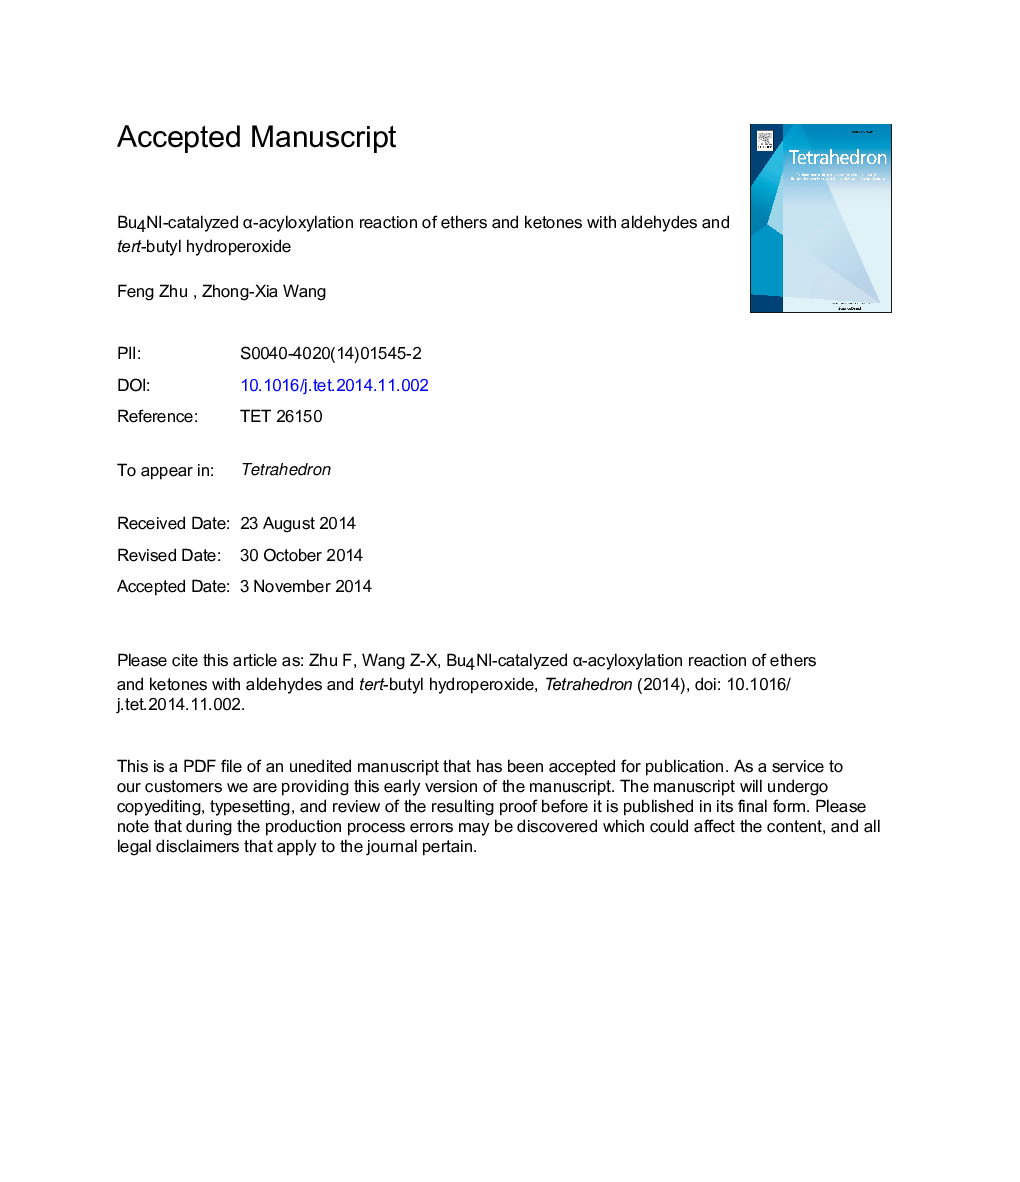 Bu4NI-catalyzed Î±-acyloxylation reaction of ethers and ketones with aldehydes and tert-butyl hydroperoxide